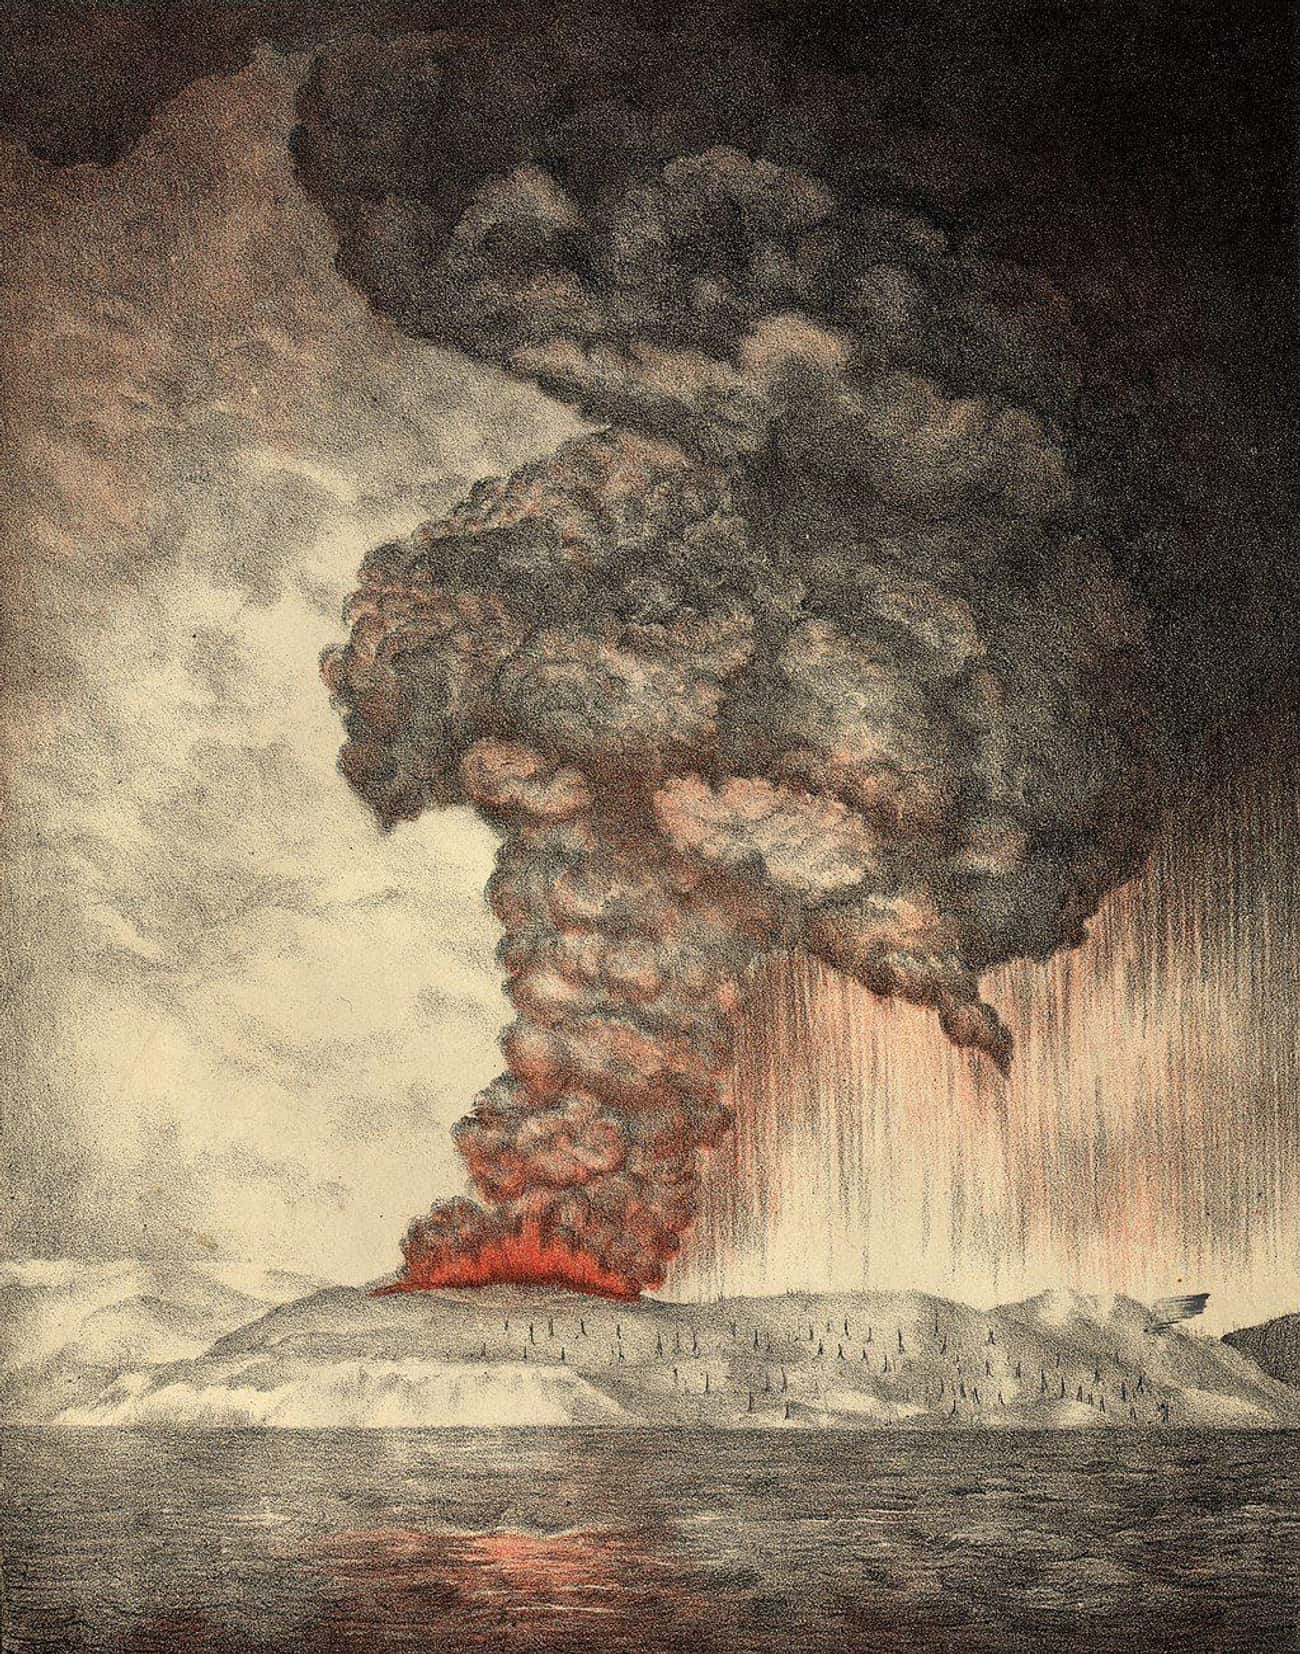 Eventually, Volcanoes Stopped Erupting